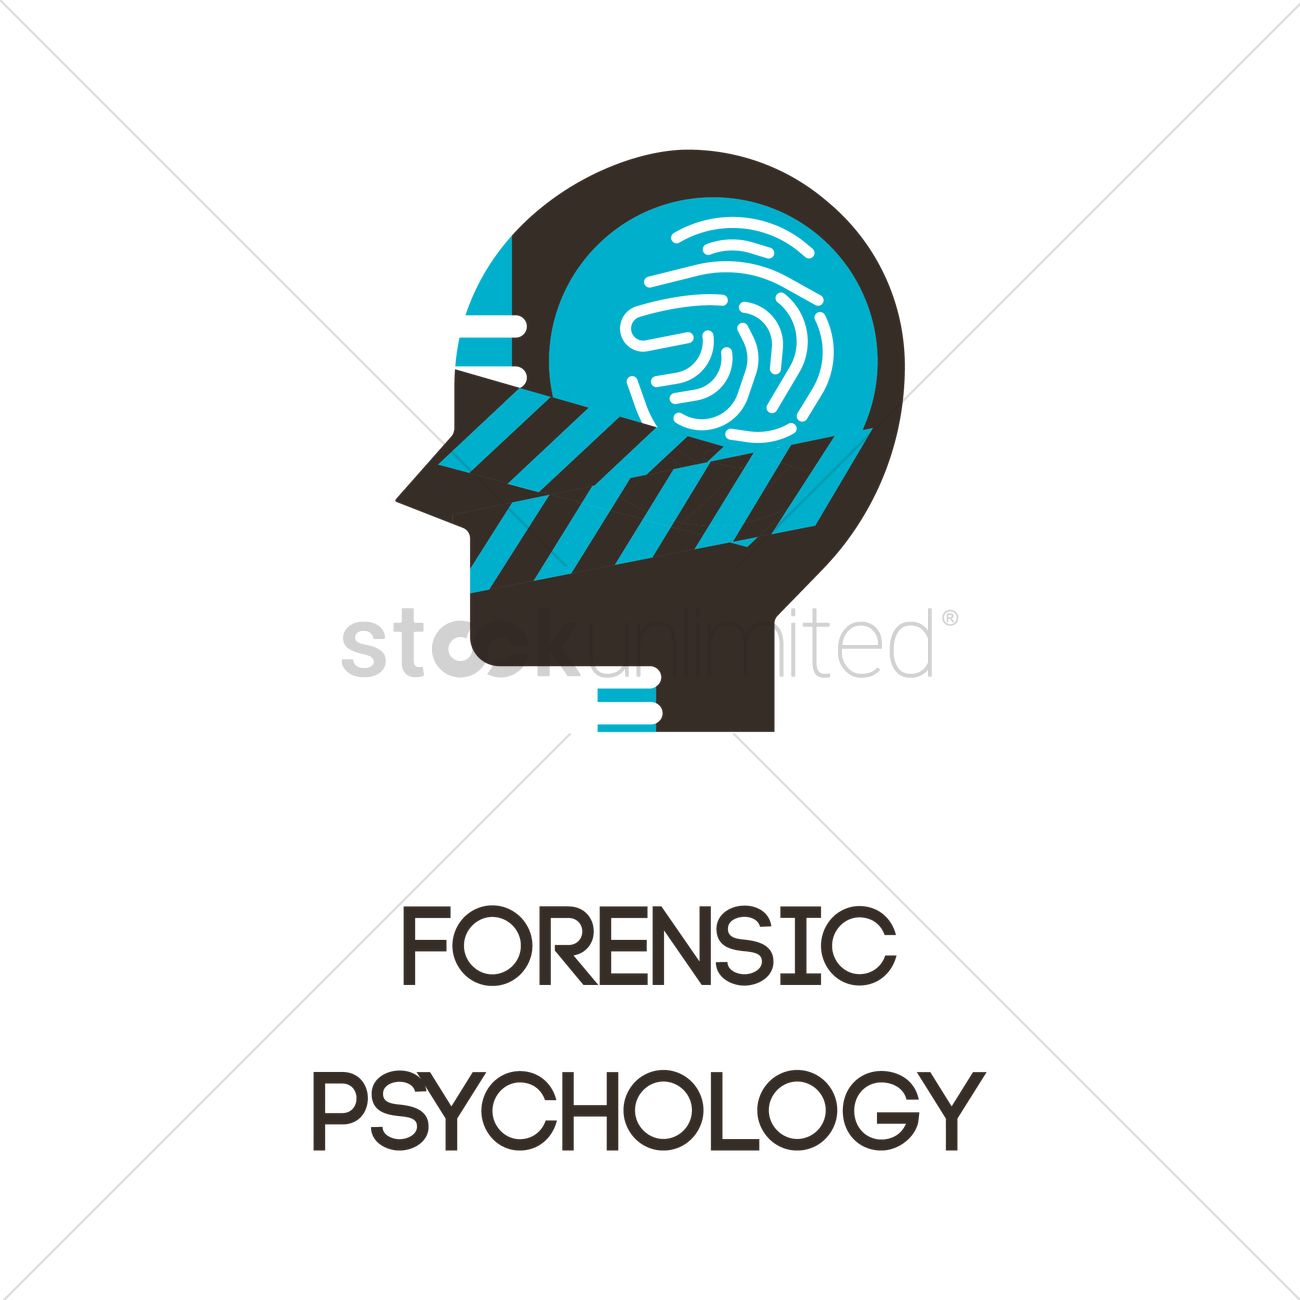 Forensic psychology icon Vector Image - 2023207 | StockUnlimited